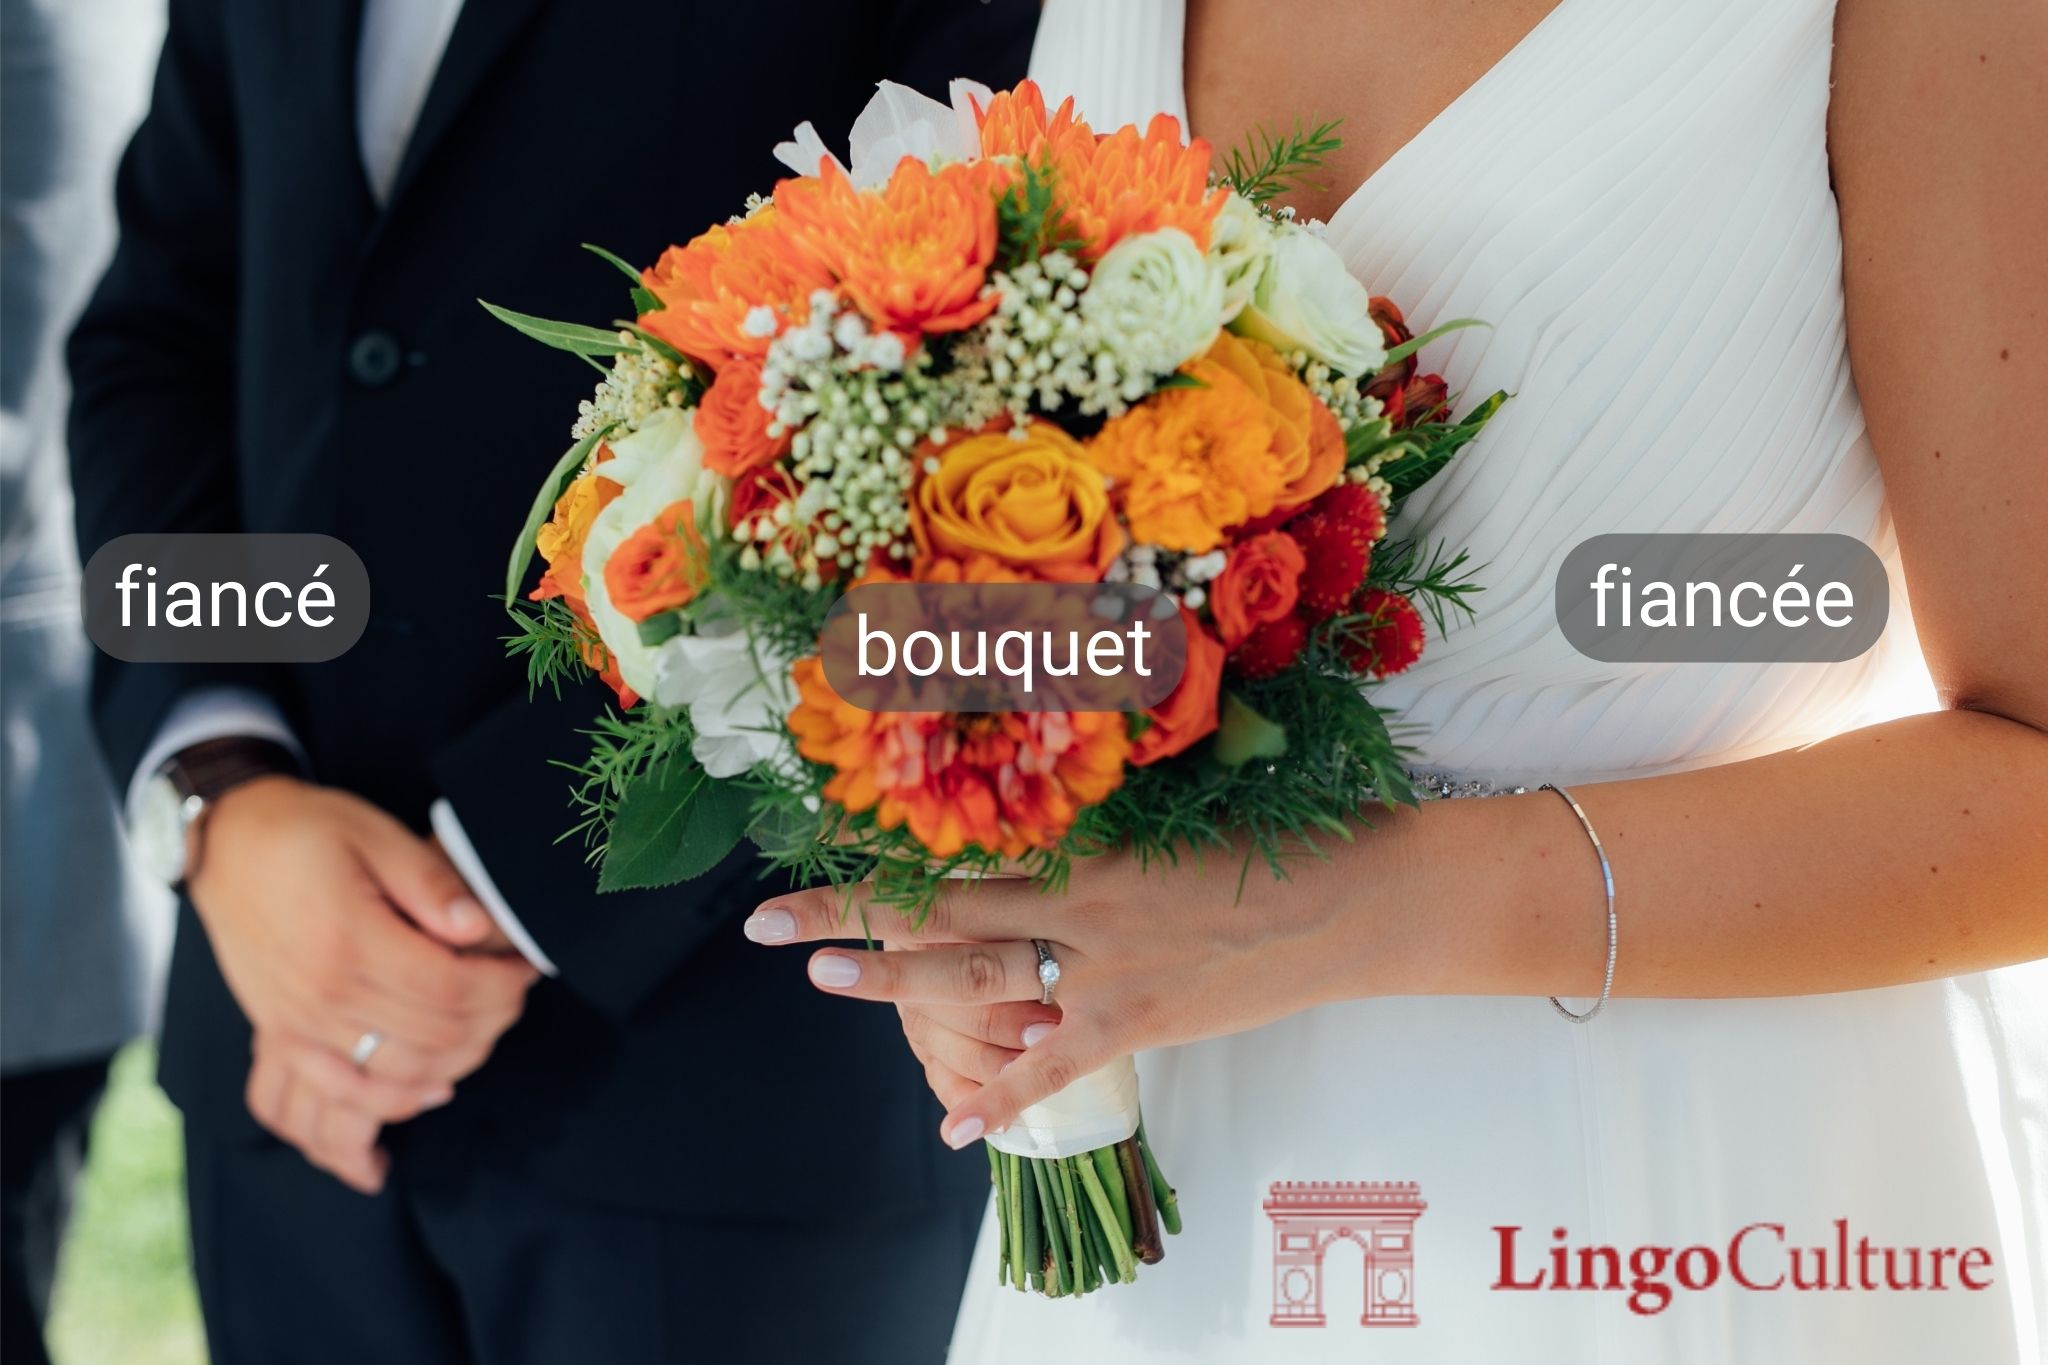 Bouquet, Fiancé, and Fiancée: French words used in English